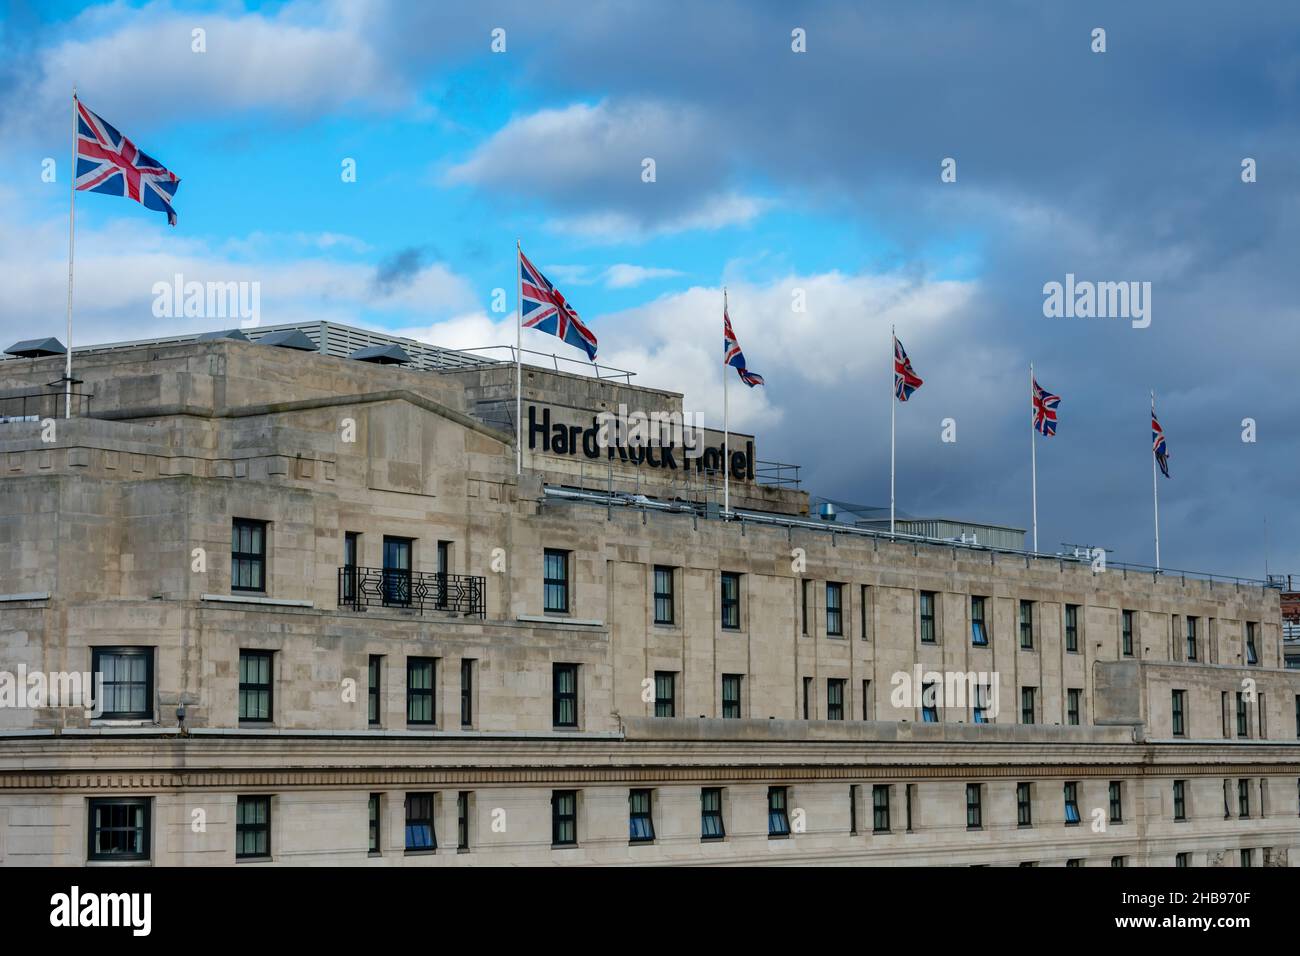 London. UK- 12.01.2021. The Hard Rock Hotel on Oxford Street with Union Jacks flying on the top of the building. Stock Photo